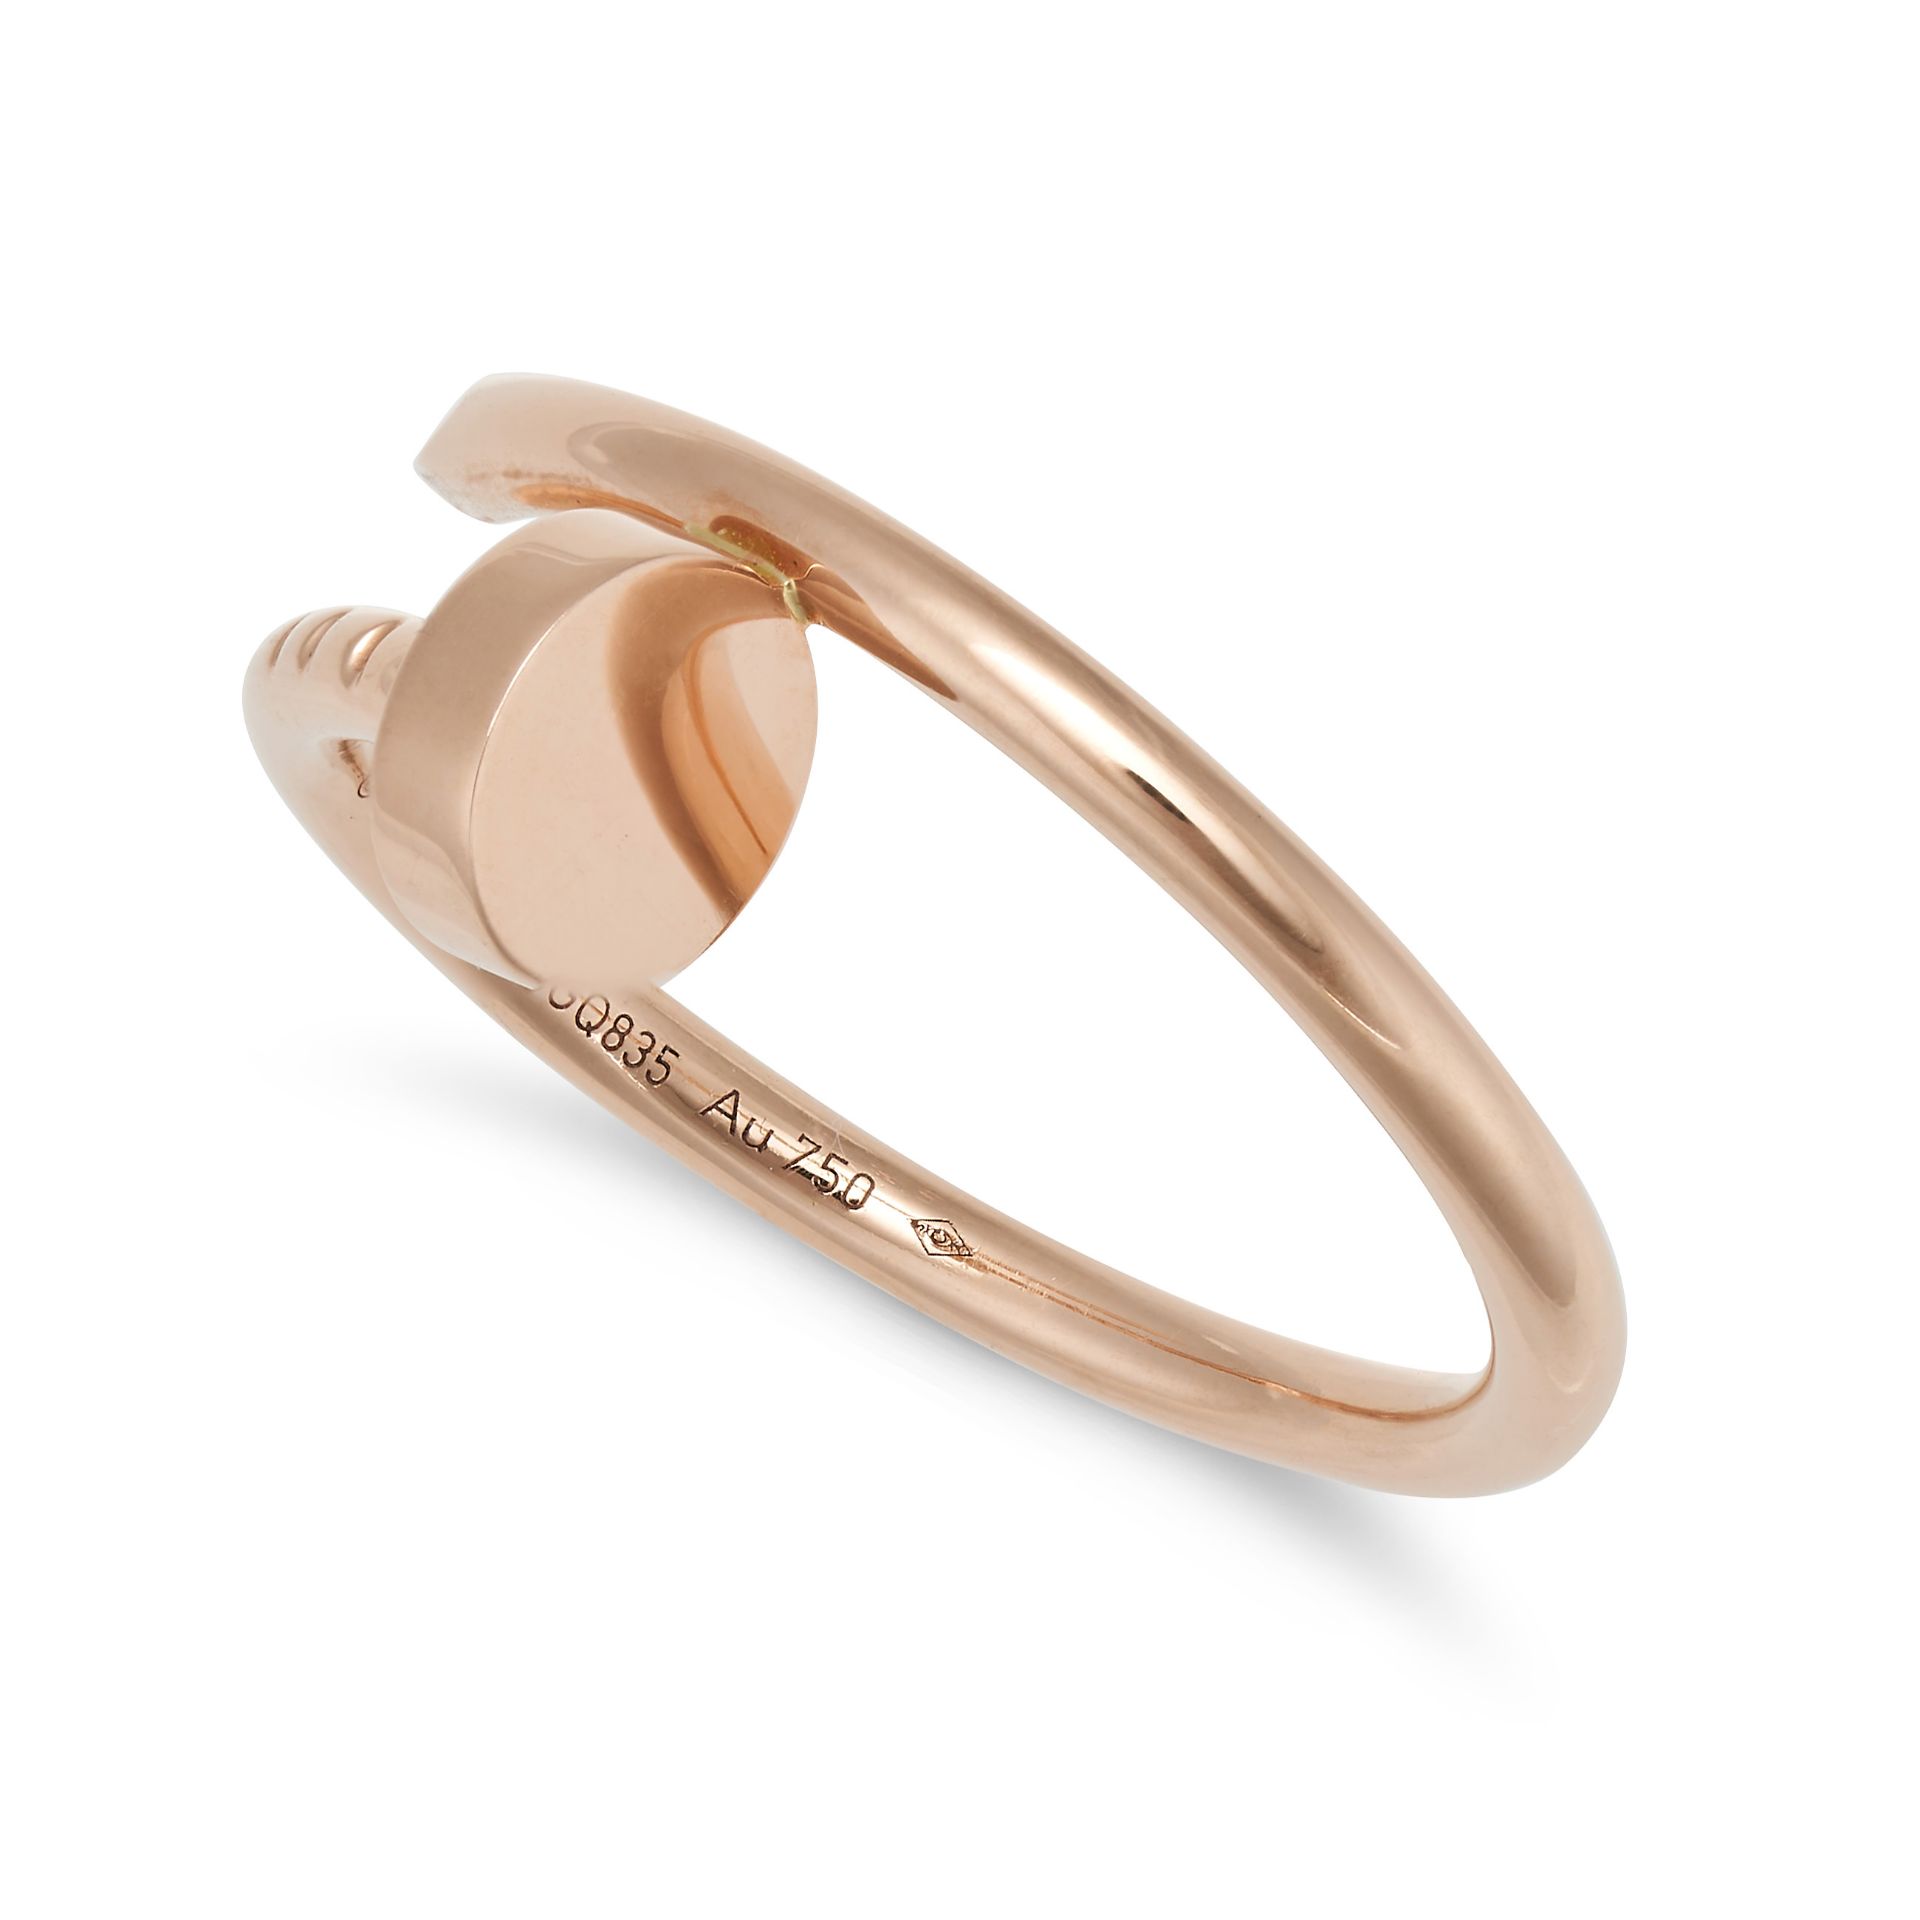 CARTIER, A JUSTE UN CLOU RING in 18ct rose gold, designed as a twisted nail, signed Cartier and n... - Image 2 of 2